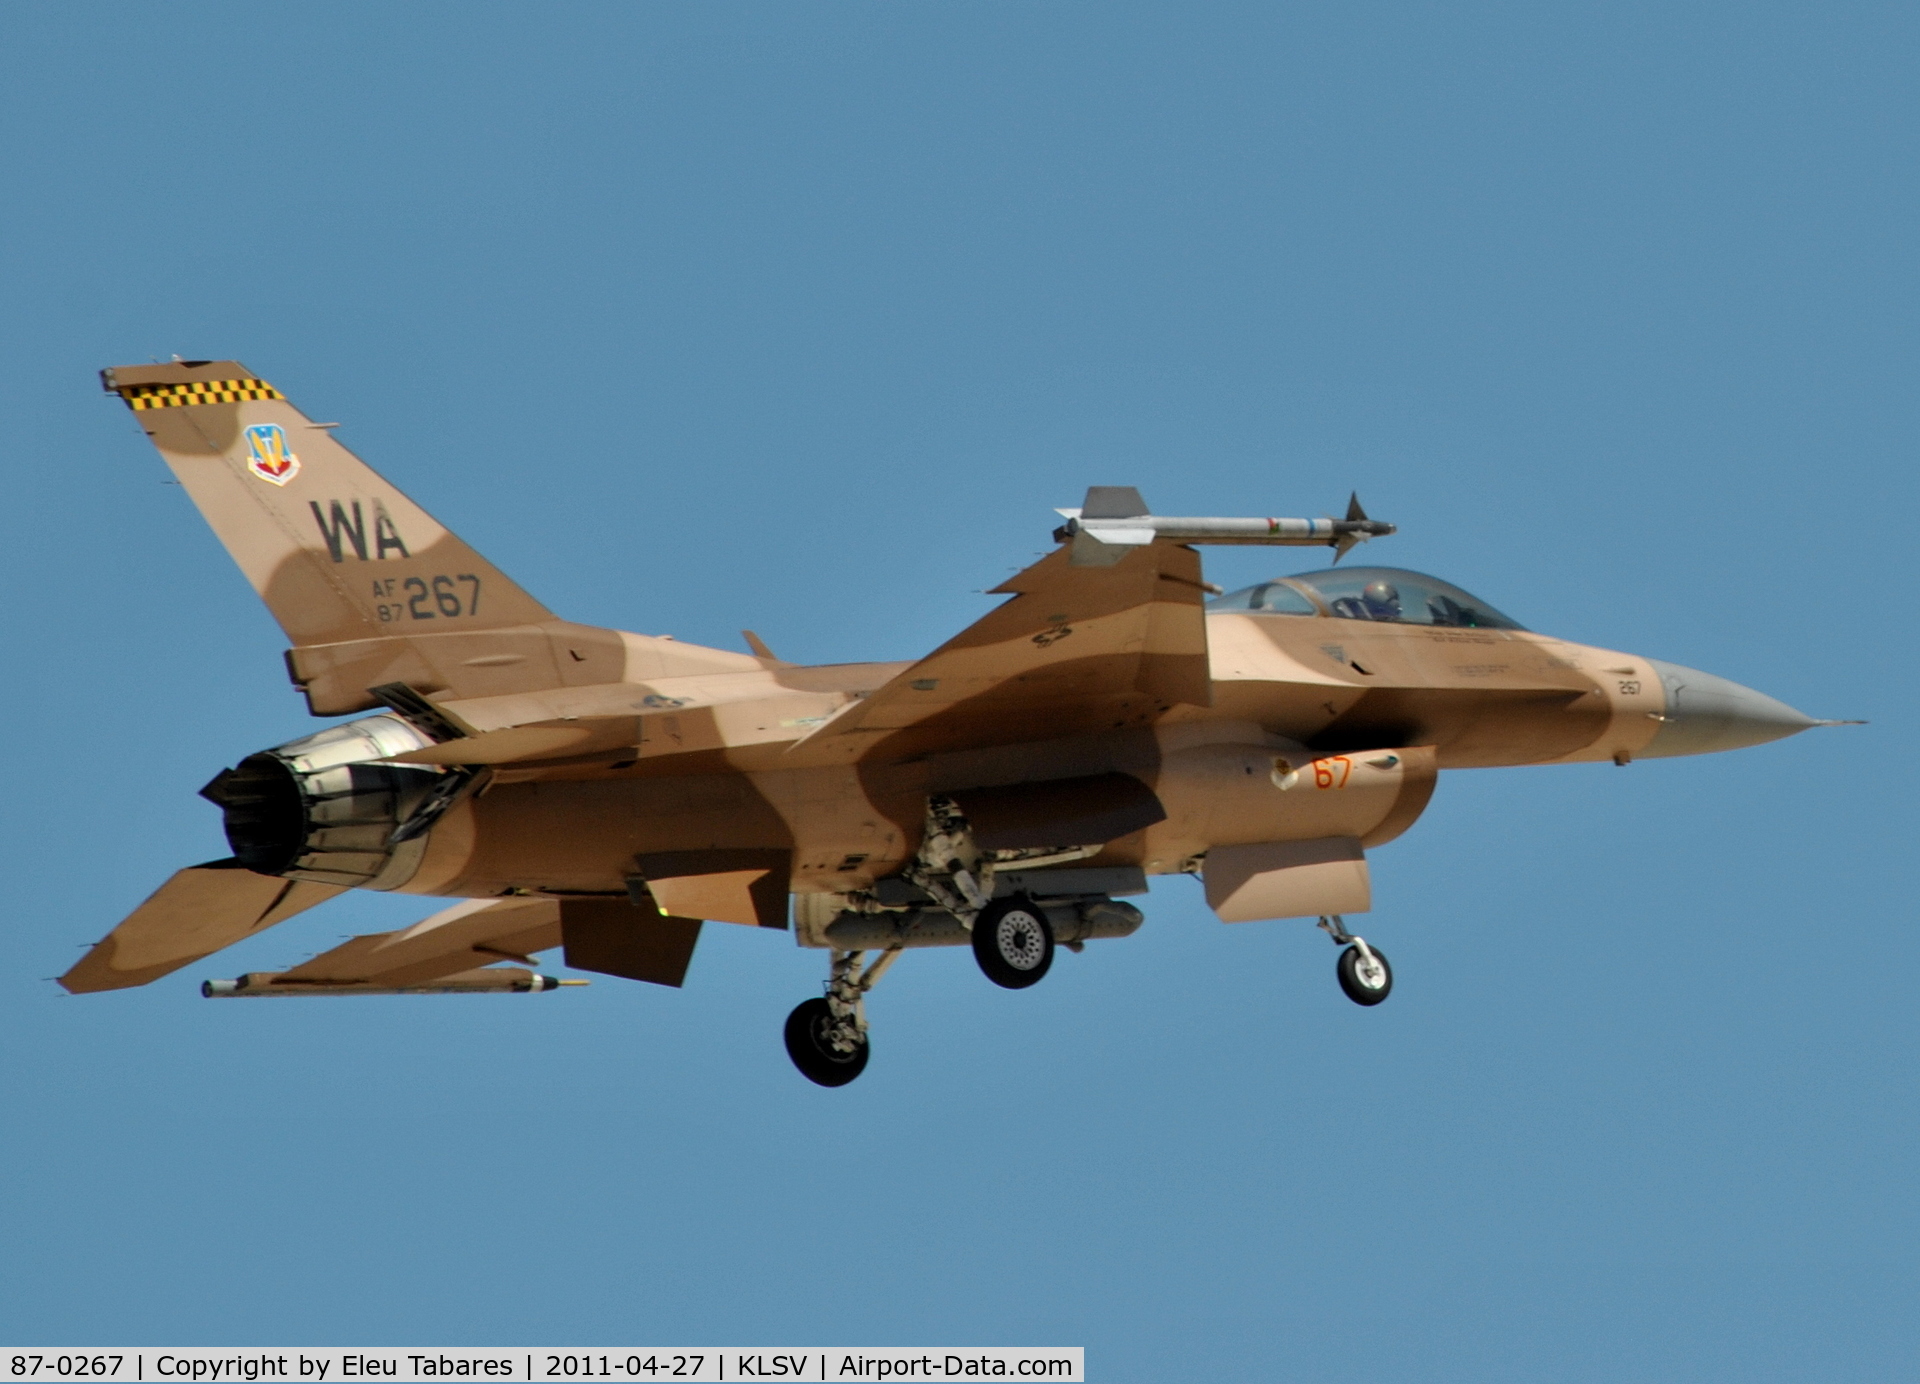 87-0267, General Dynamics F-16C Fighting Falcon C/N 5C-528, Taken during Green Flag Exercise at Nellis Air Force Base, Nevada.